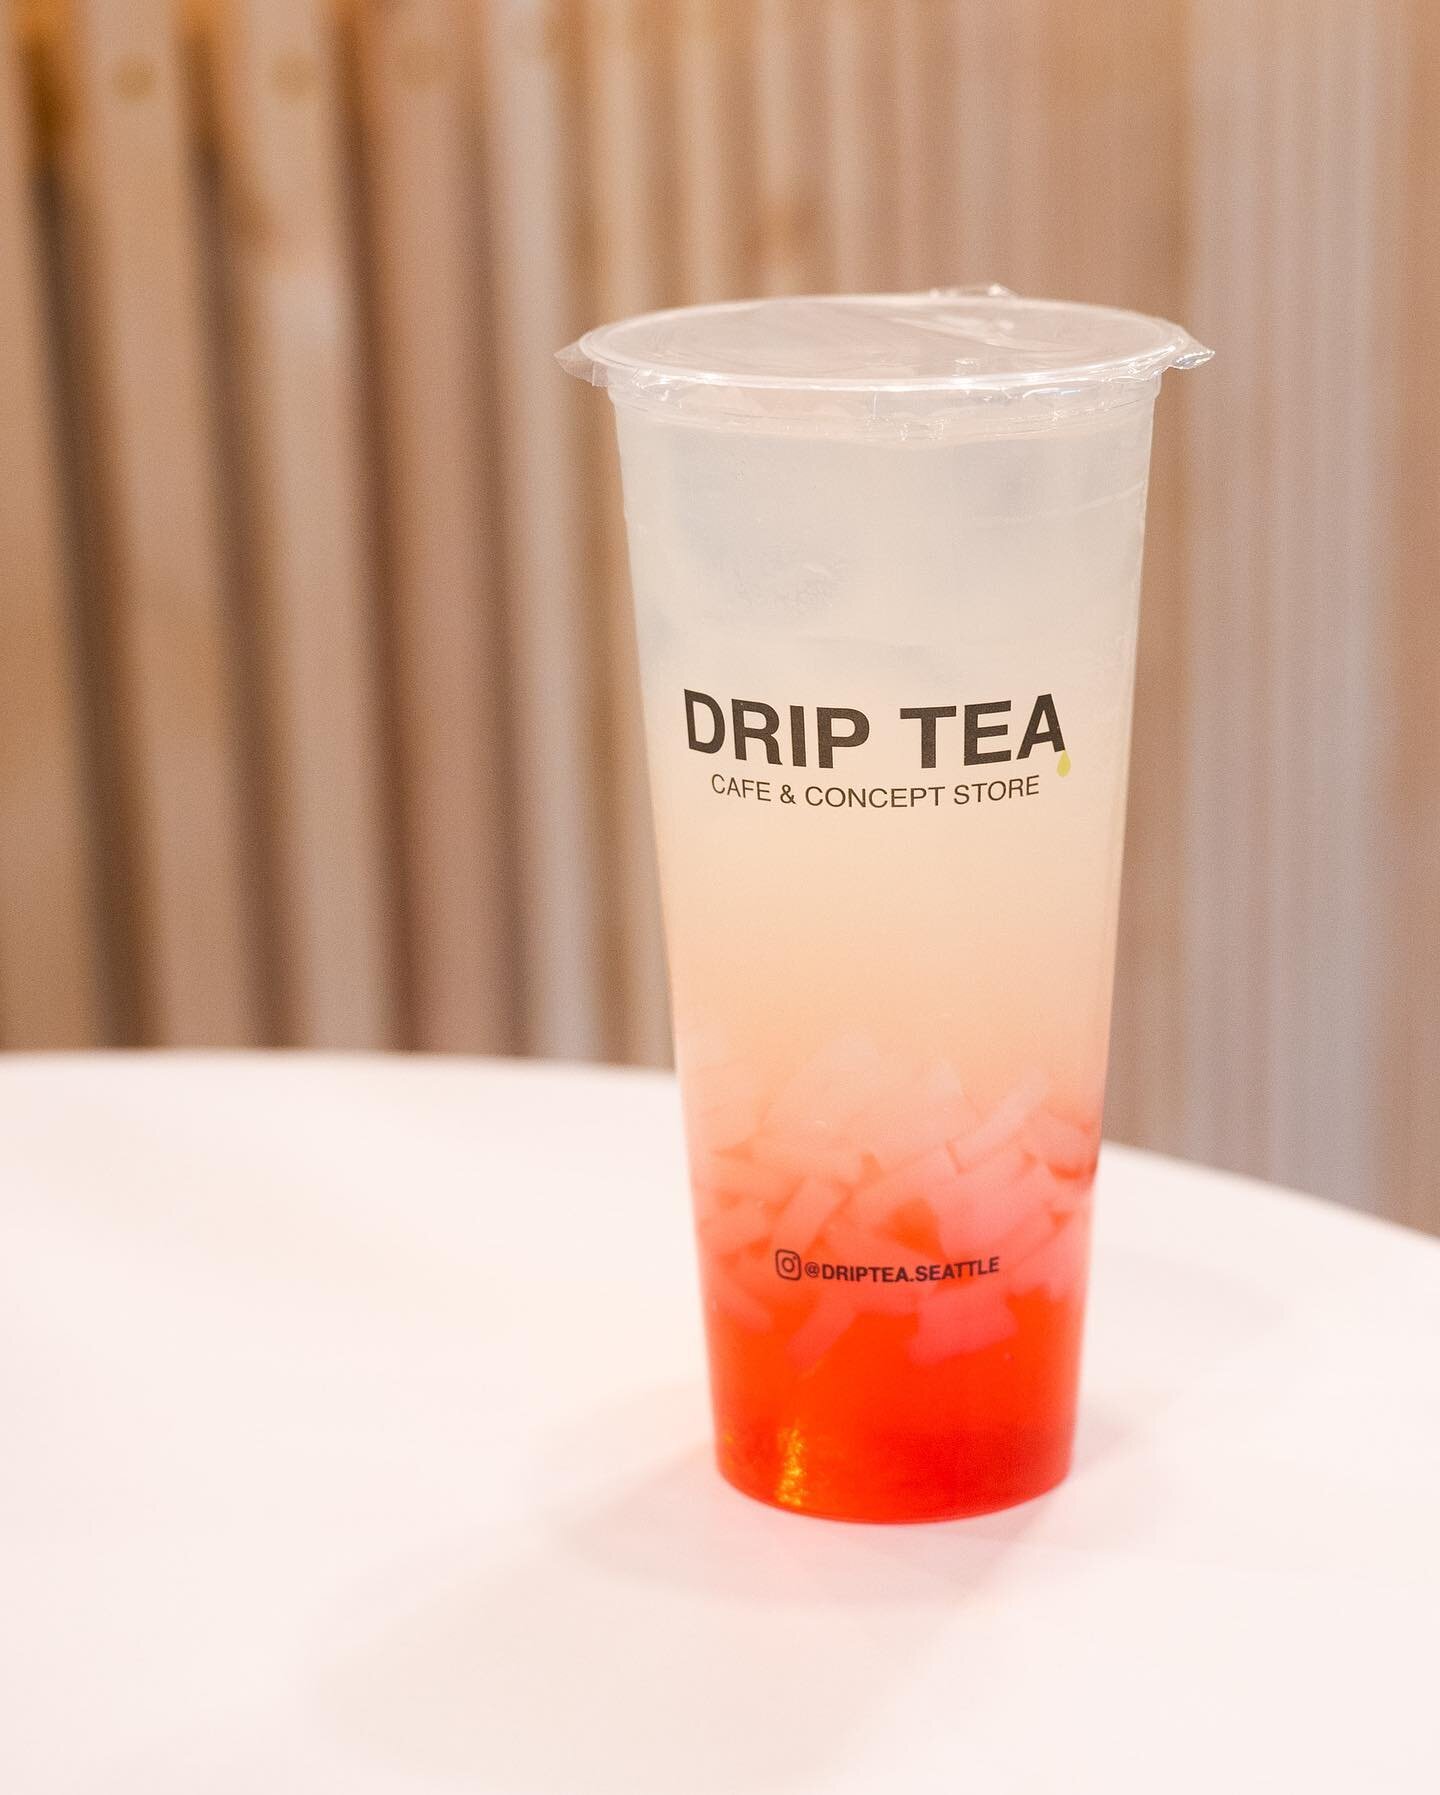 Looking for a refreshing fix? &ldquo;CLB&rdquo; got you covered 🌹🍋🤤 Layered rose lemonade with lychee jelly mixes perfectly for that tart and sweet taste. 

Try it for yourself today! 💚
1416 10th Ave
Seattle, WA 98122
#driptea #cafe #boba #bubble